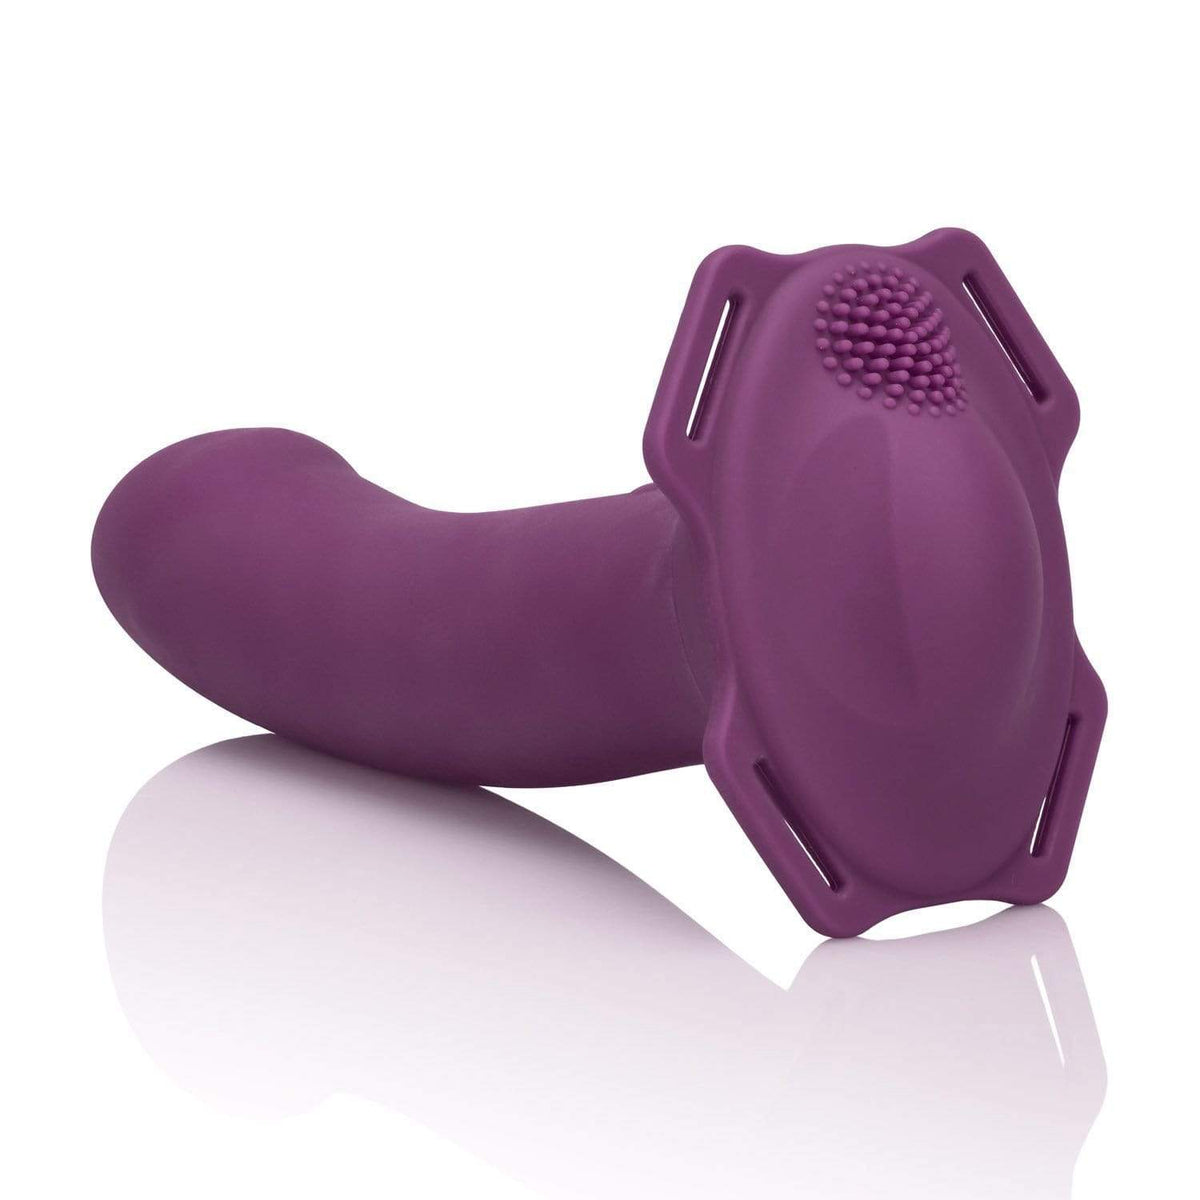 California Exotics - Me2 Rumbler Strap On Vibrating Dildo (Purple)    Strap On with Non hollow Dildo for Female (Vibration) Rechargeable